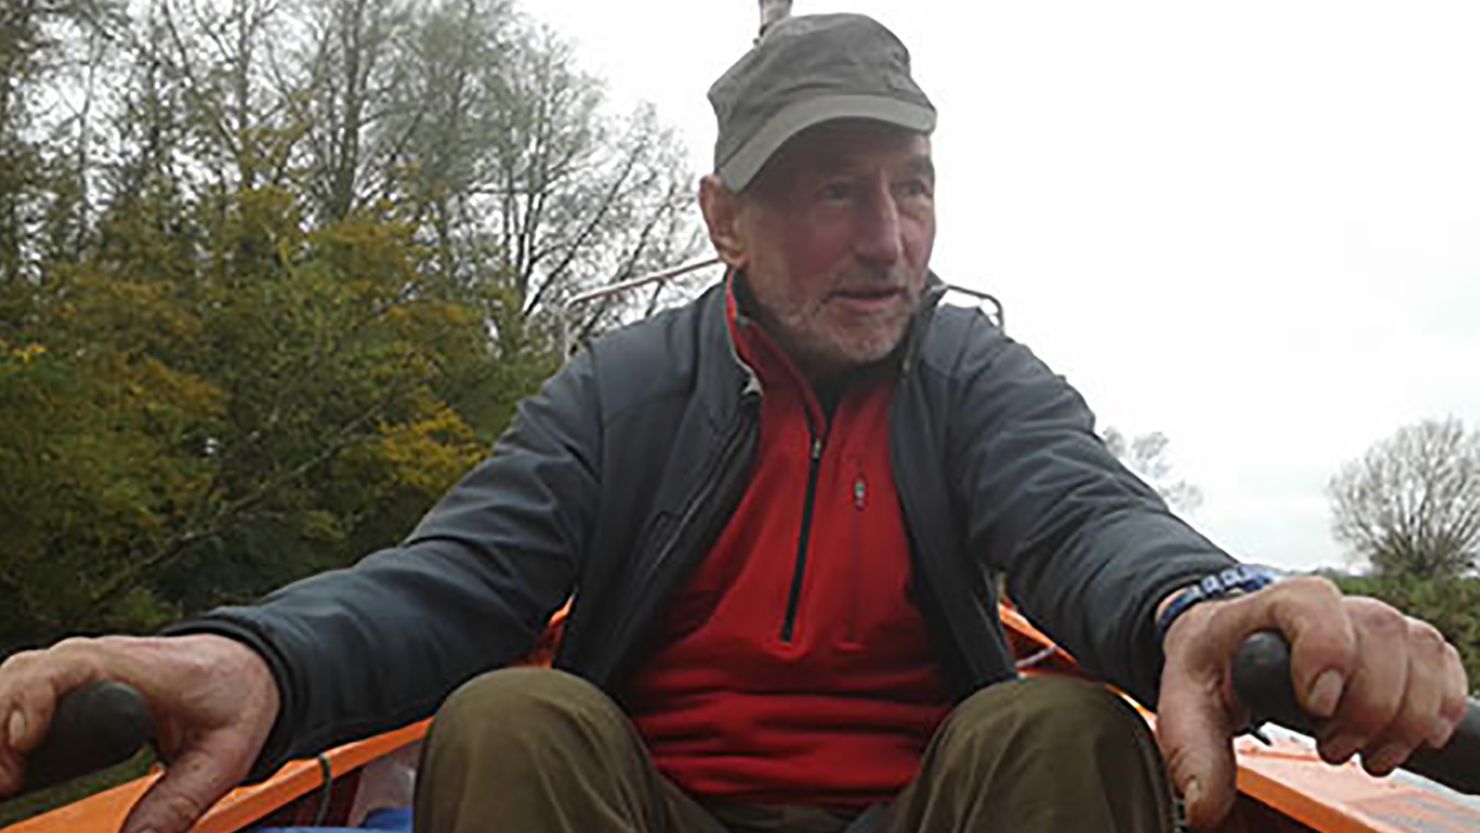 Graham Walters has now rowed across the Atlantic five times -- three of them solo.